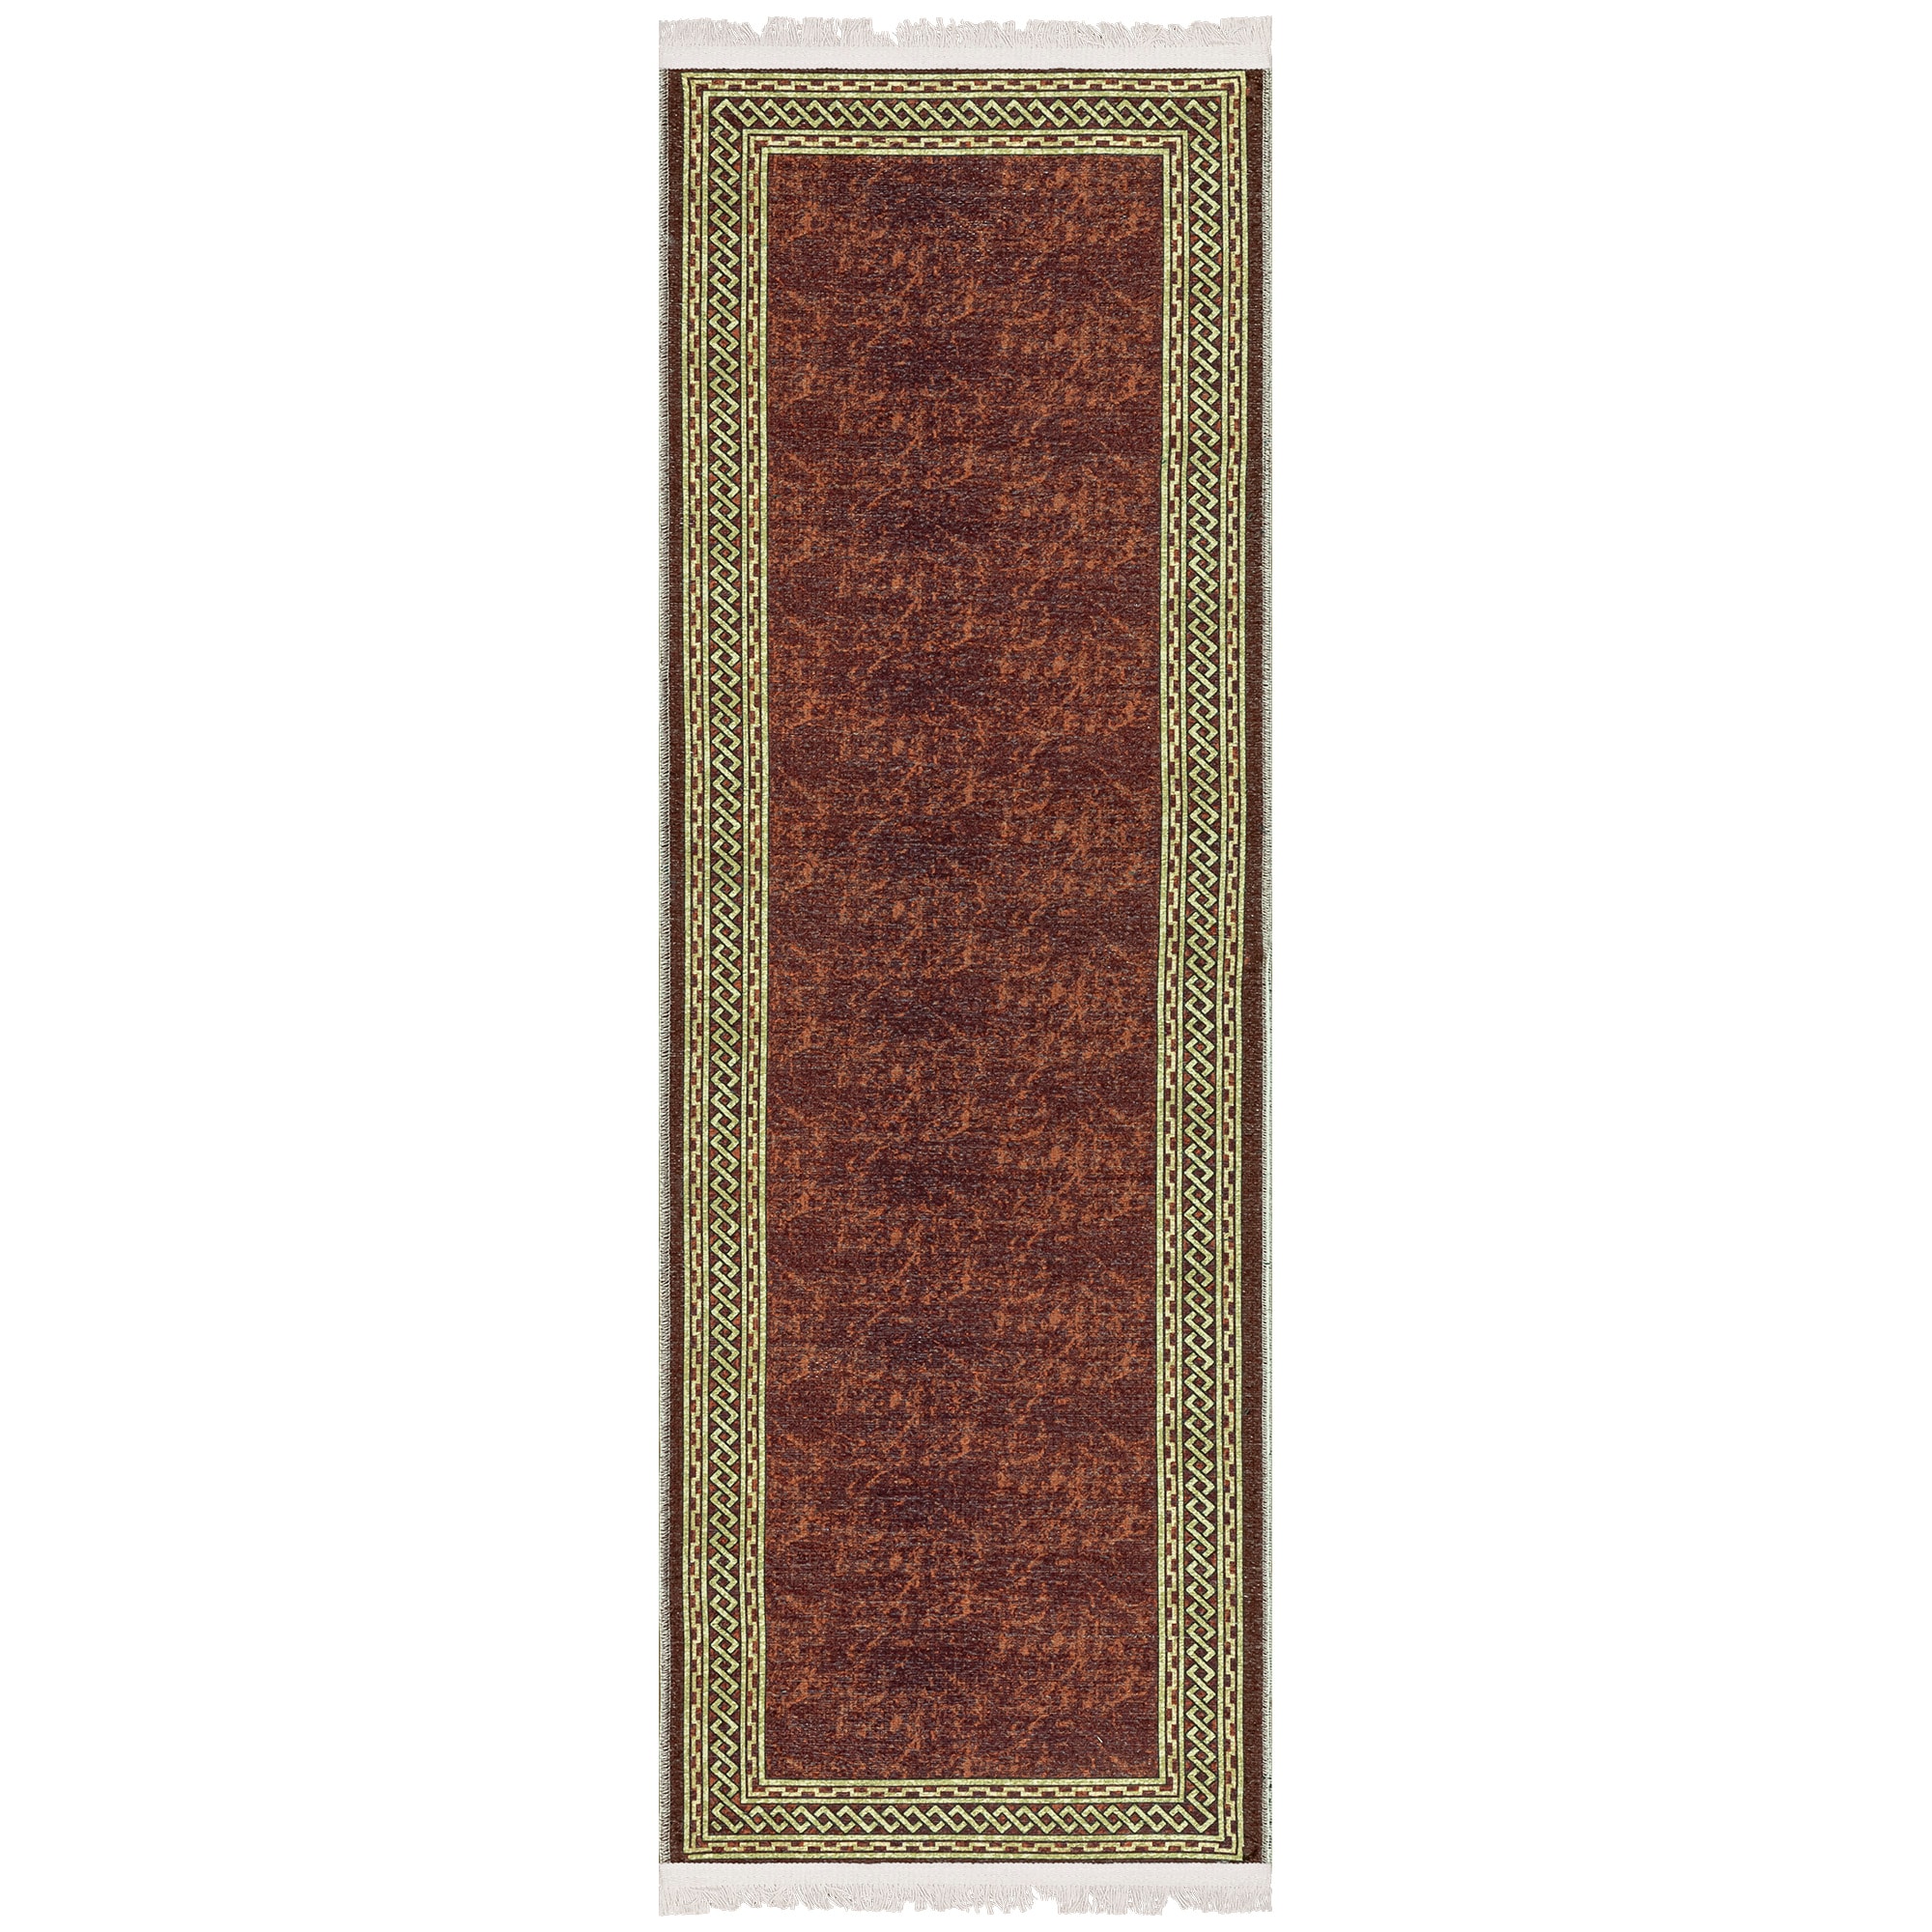 Ottomanson Non Shedding Washable Wrinkle-Free Cotton Flatweave Text 2x5 Laundry Room Runner Rug, 2' x 5', Brown